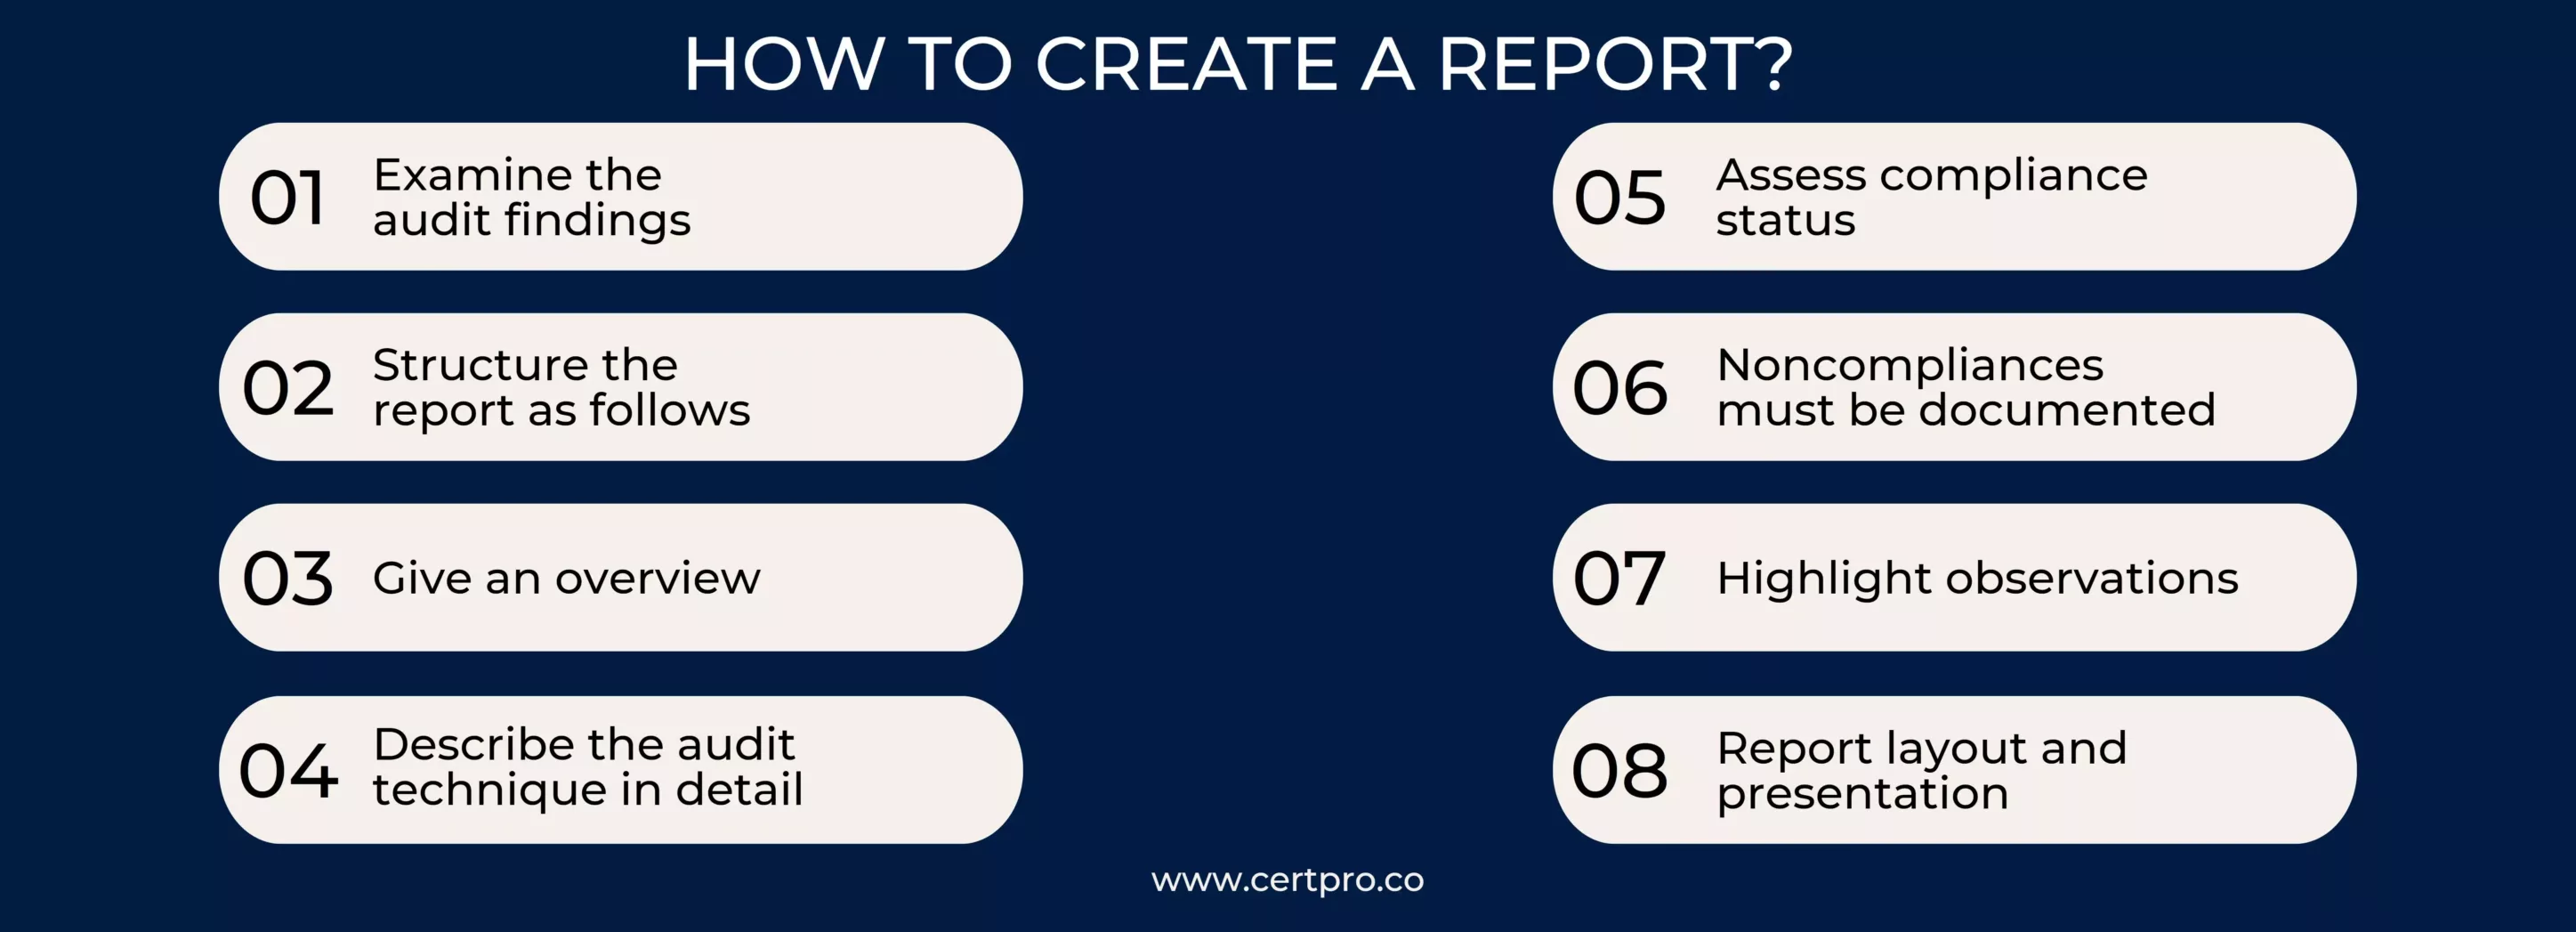 HOW TO CREATE A REPORT